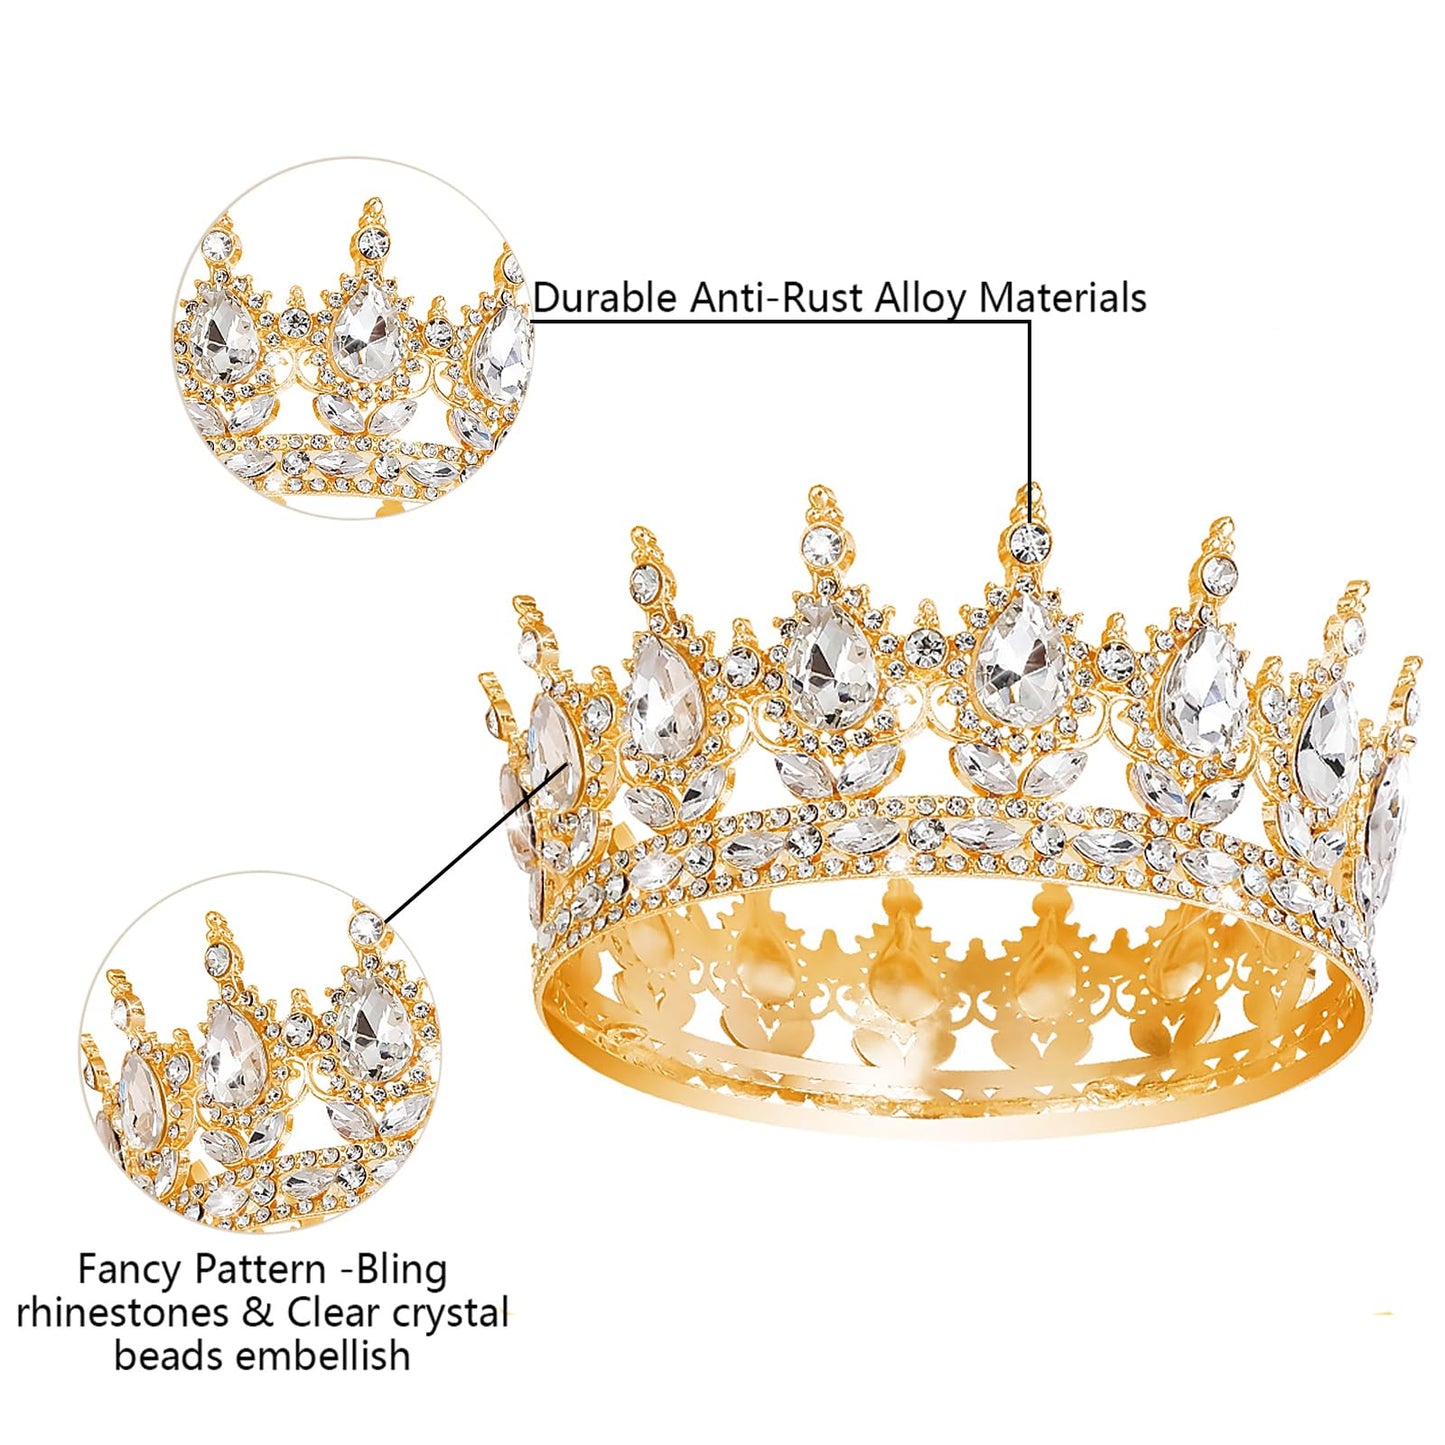 Queen Crown Rhinestone Wedding Crowns and Tiaras for Women Costume Party Hair Accessories Princess Birthday Crown Crystal Bridal Crown (Gold White Crown)